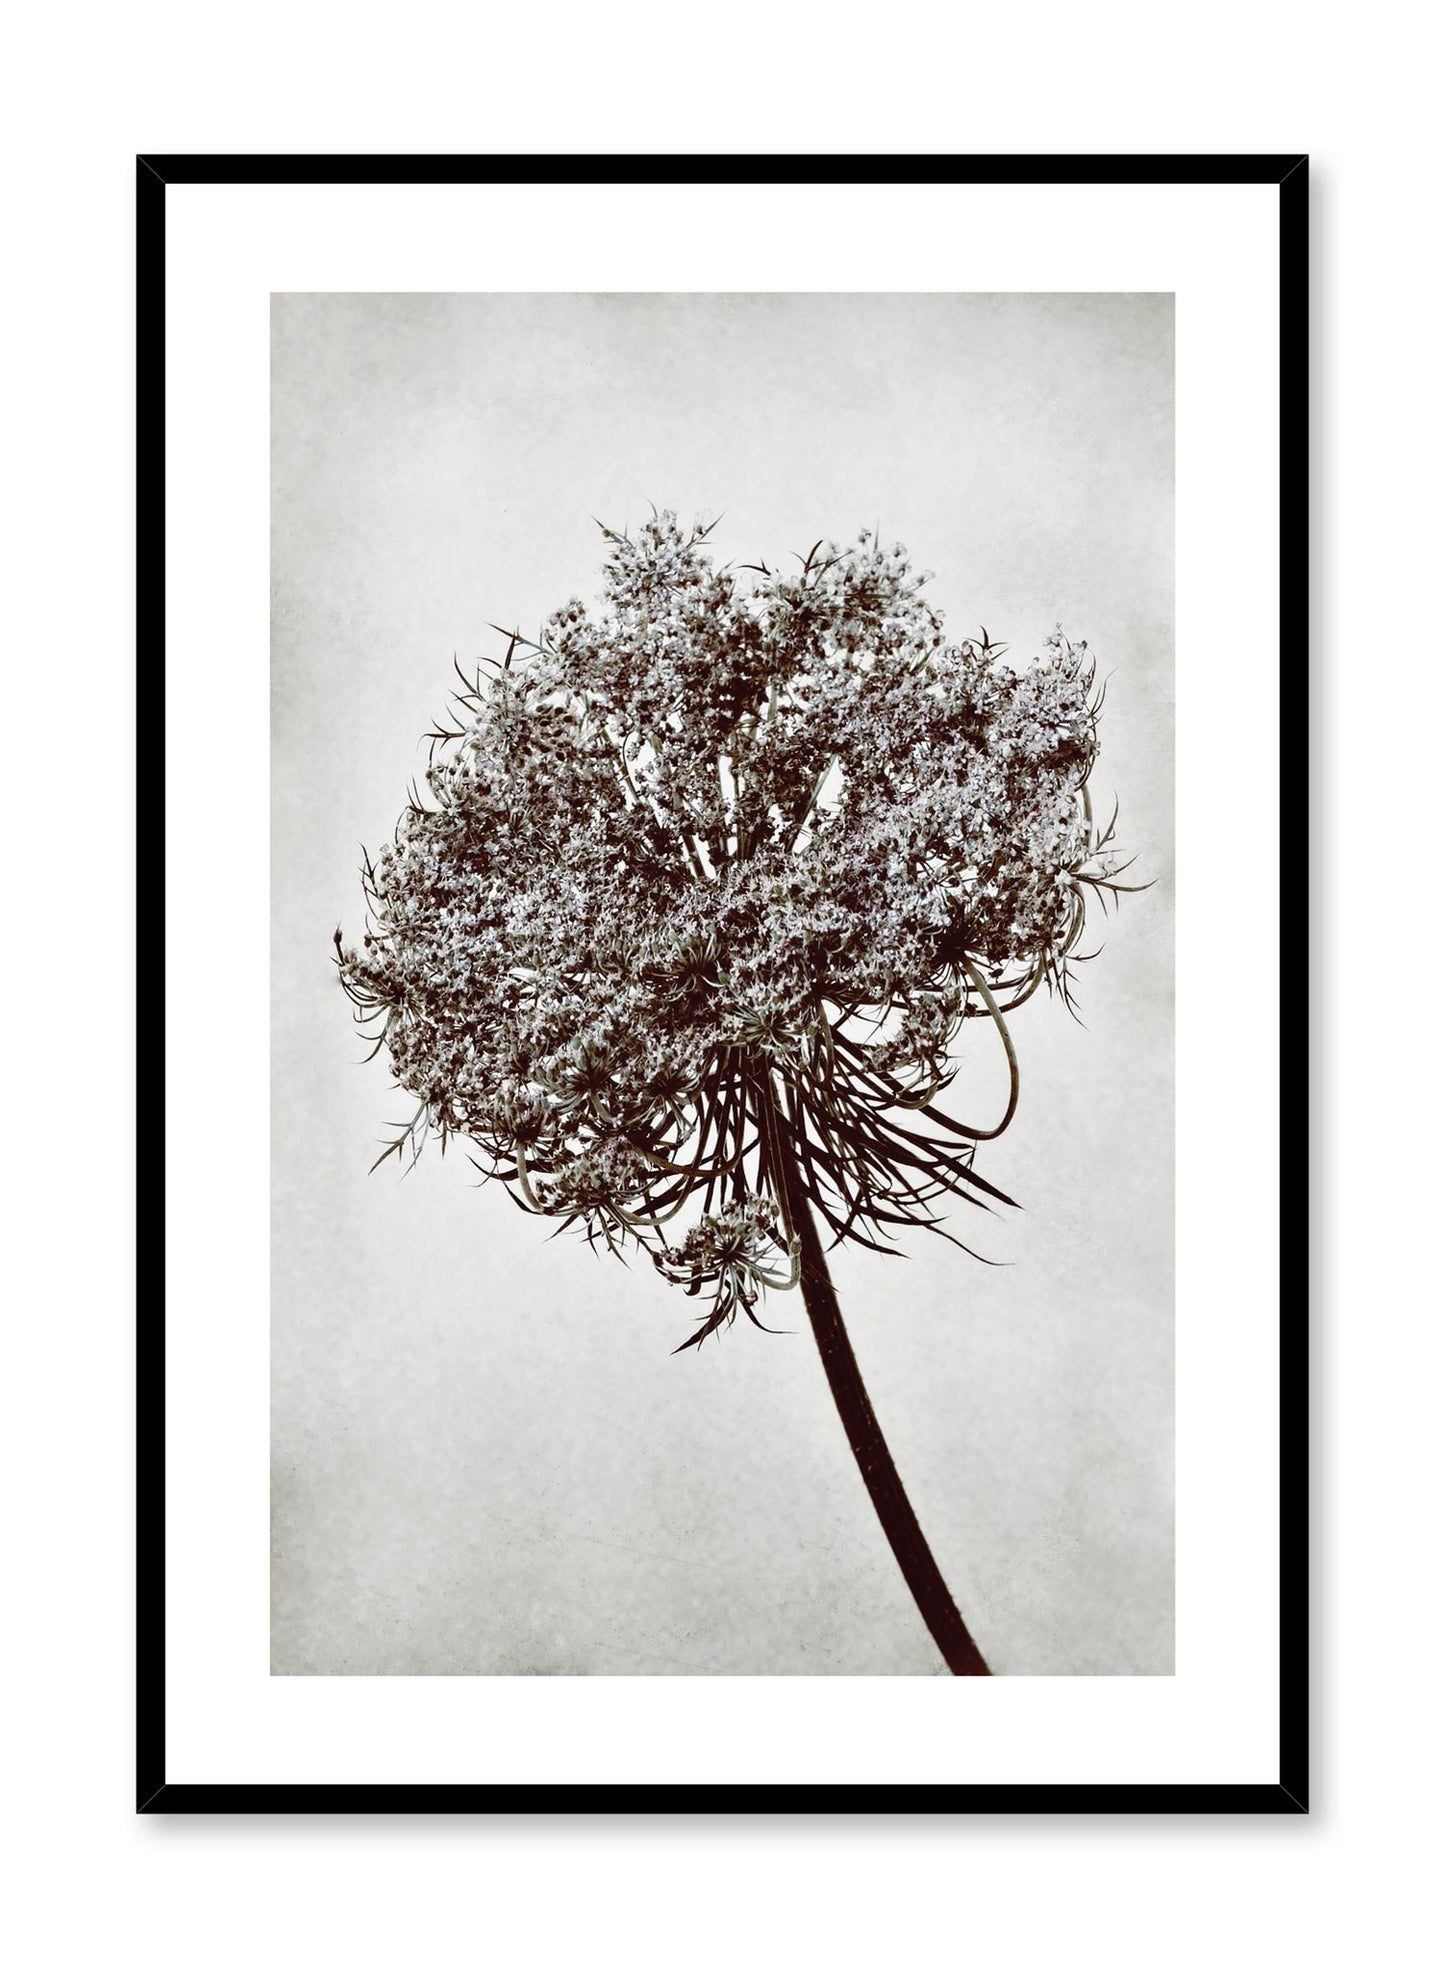 Minimalist design photography poster of black and white Towering Tree by Love Warriors Creative Studio - Buy at Opposite Wall